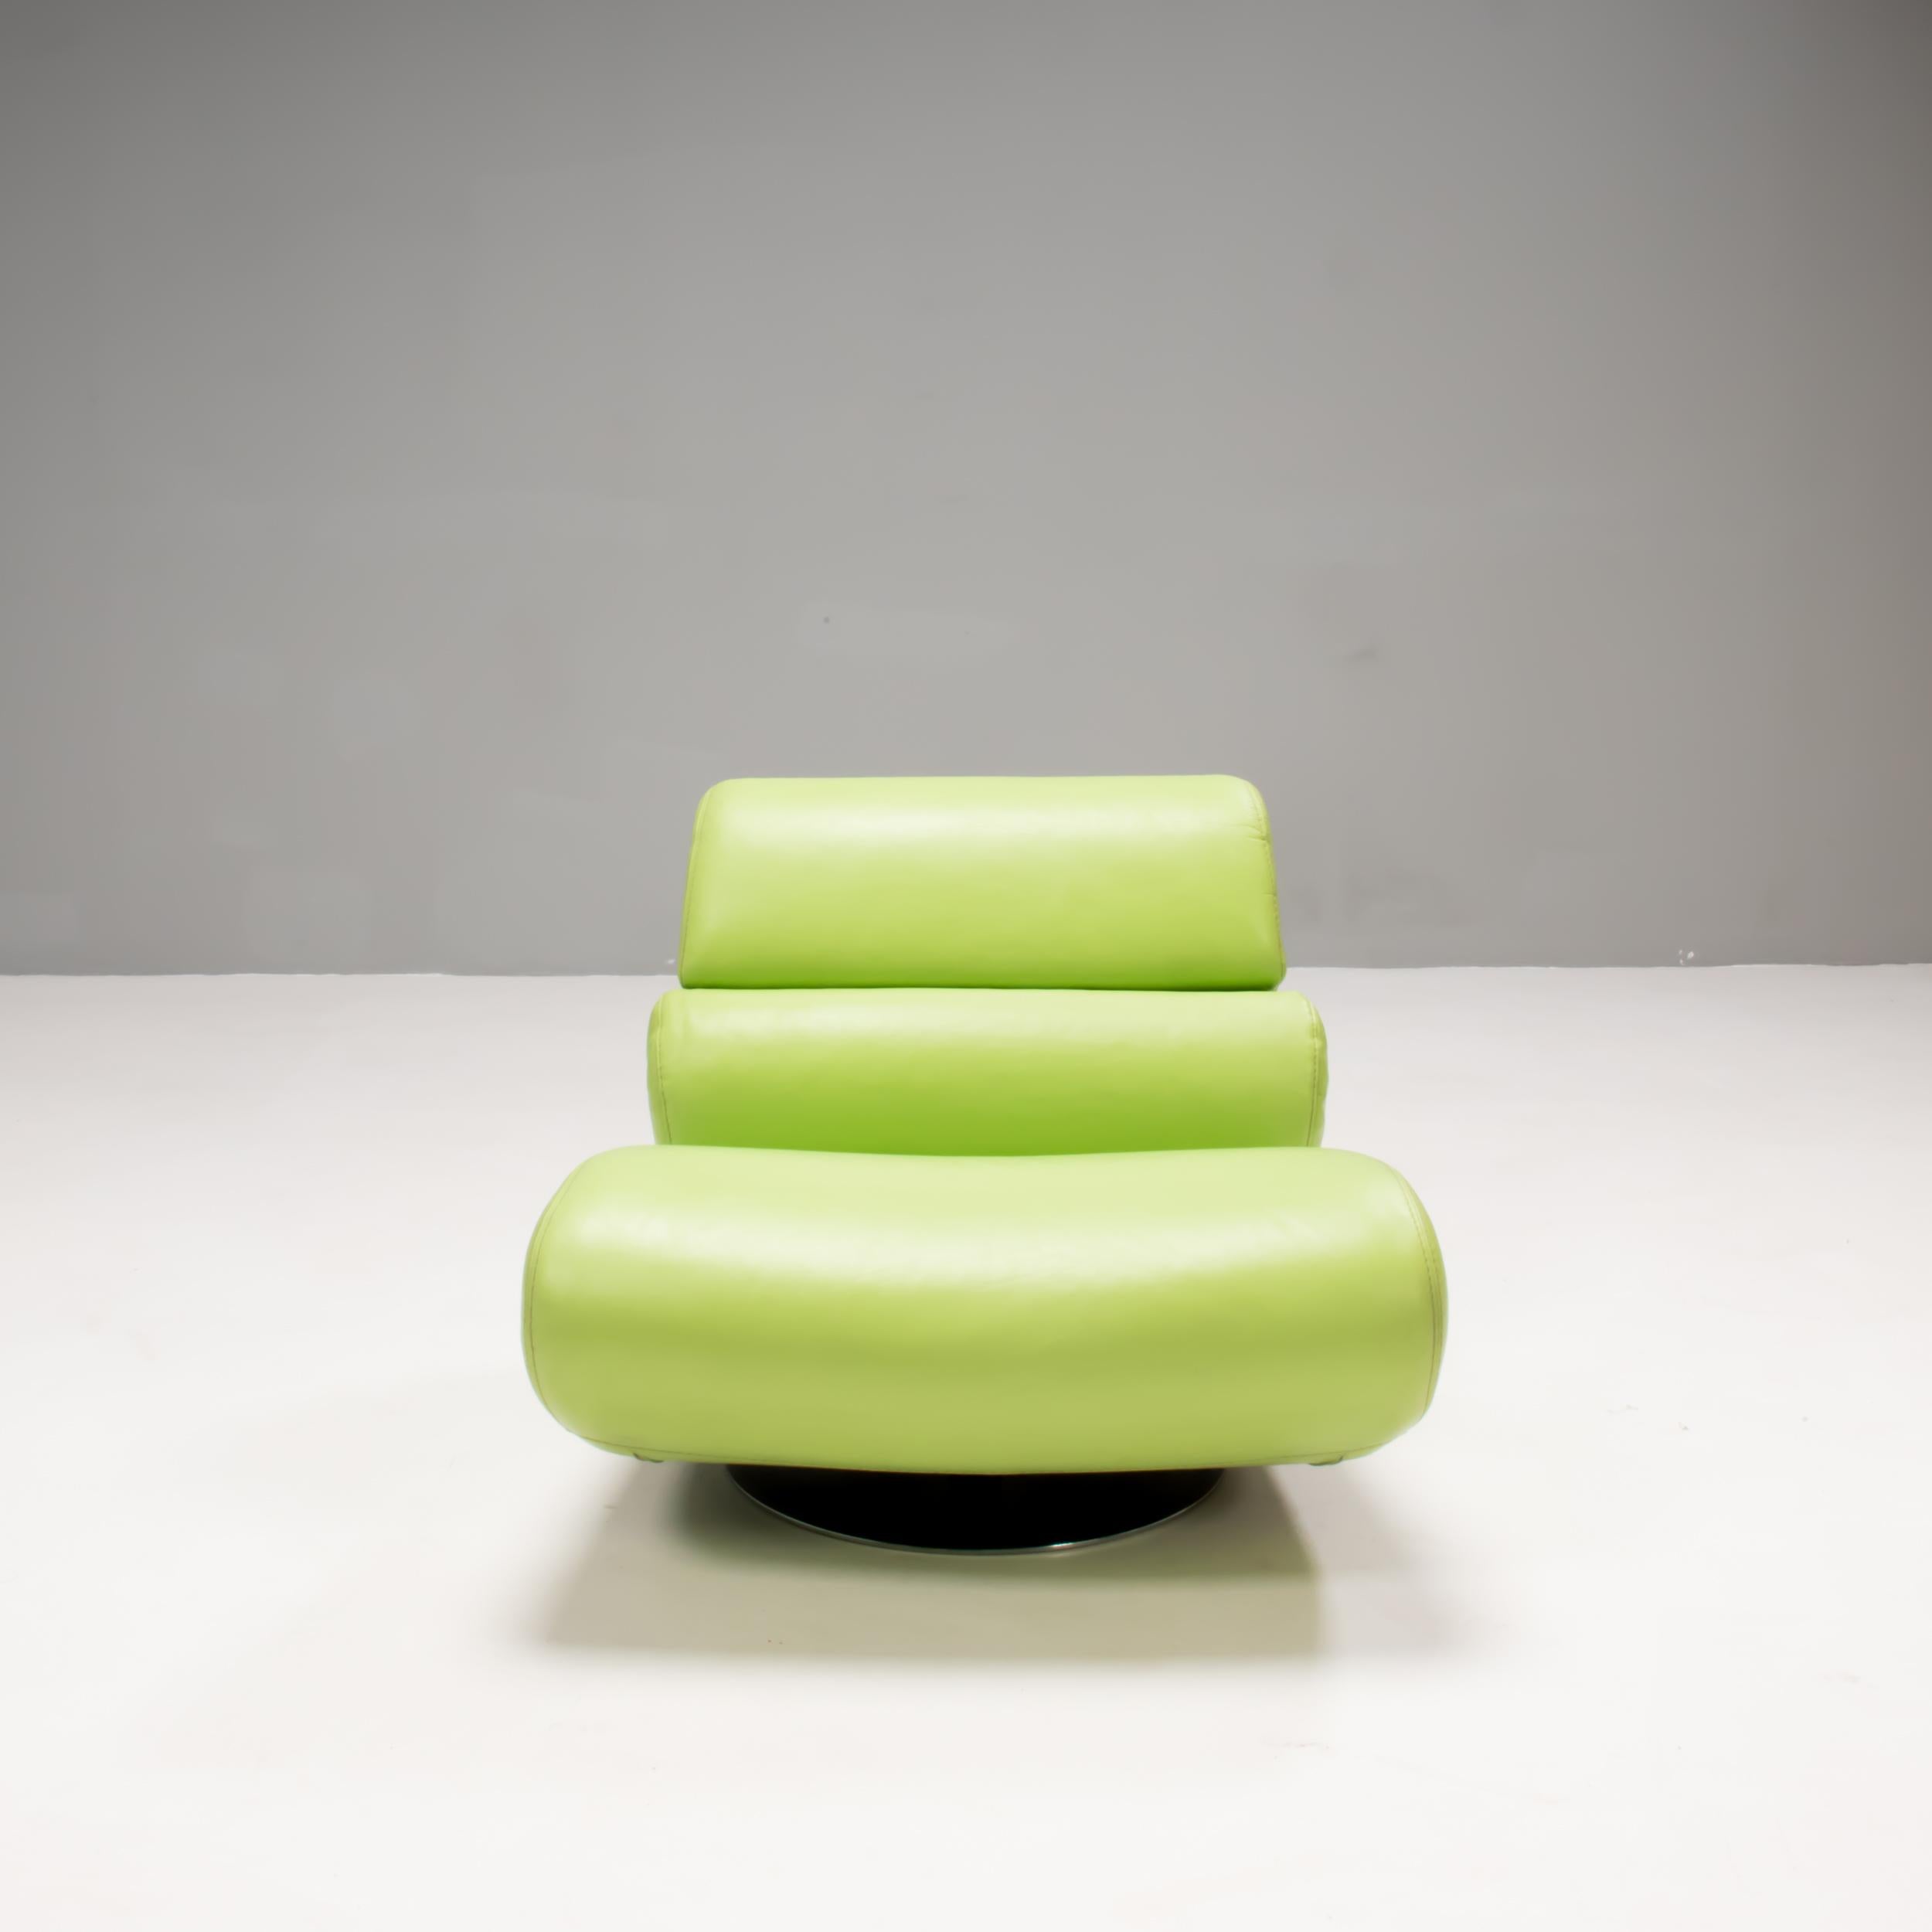 Designed by Hans Hopfer and manufactured by Roche Bobois, this lounge chair is a joyful piece of modern design.

The lounge chair is fully upholstered in vibrant lime green Tendresse leather and swivels 360 degrees on its base.

The curvaceous